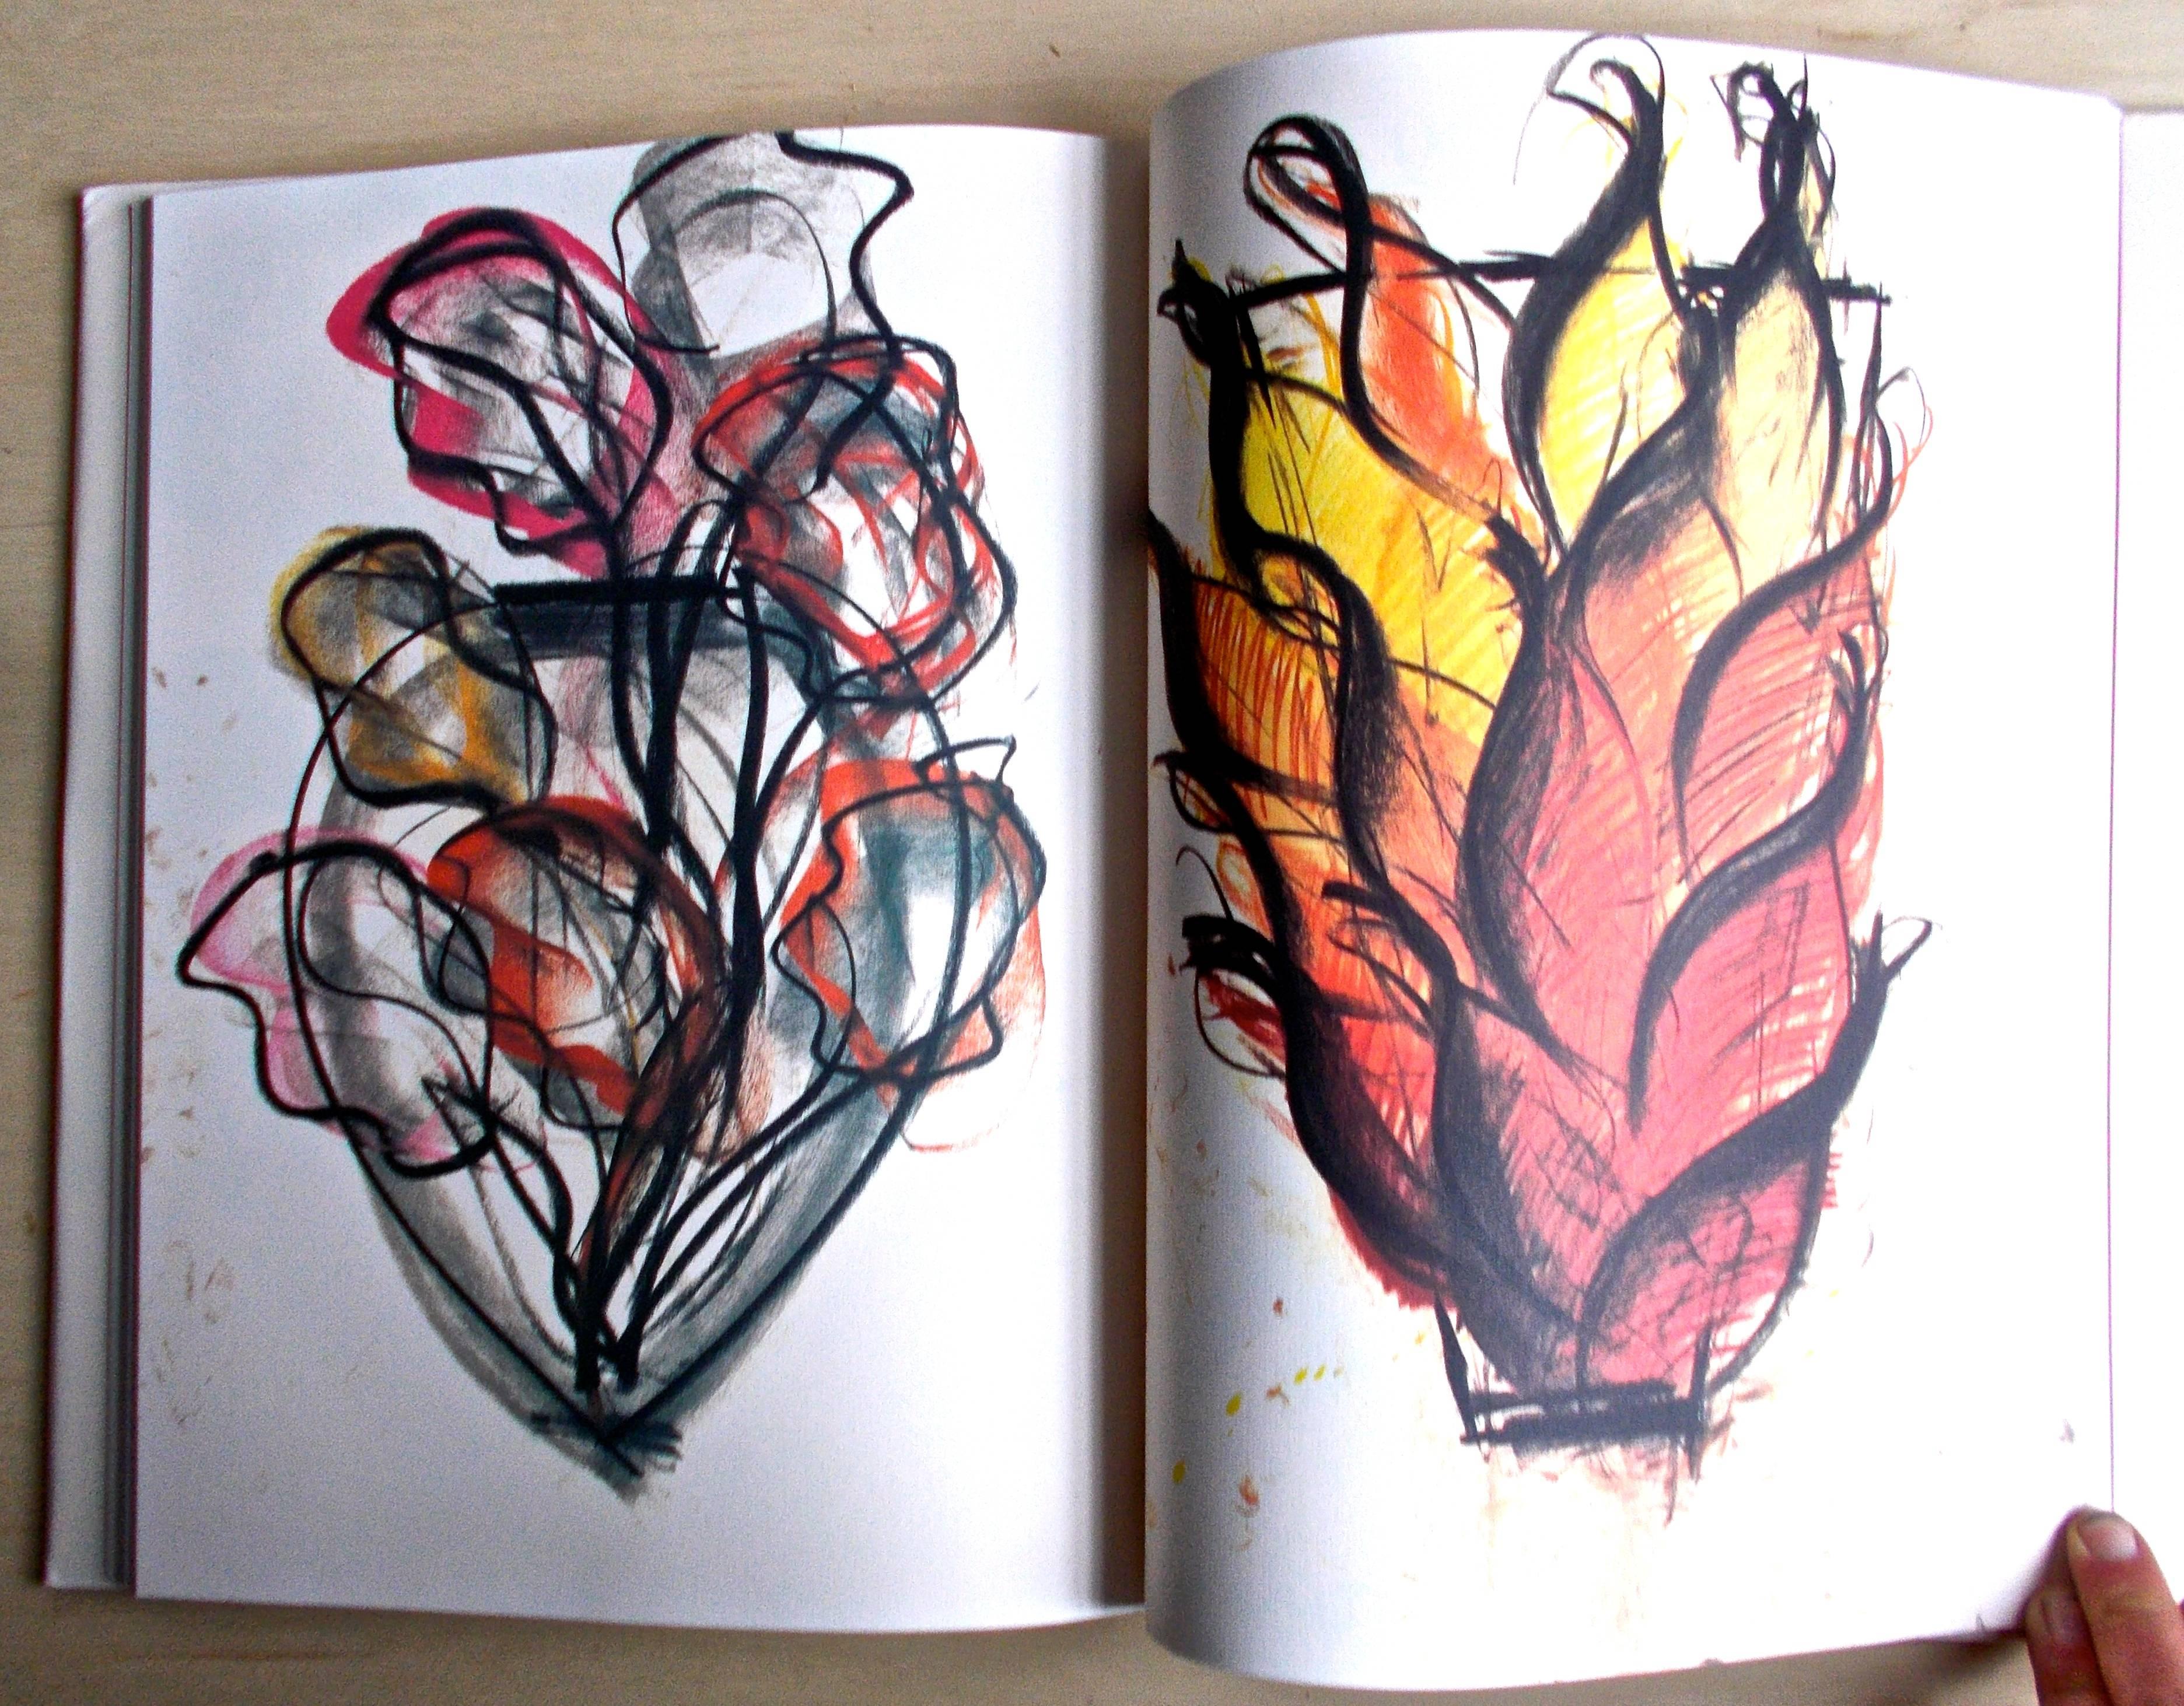 Hand-Painted Dale Chihuly 1990 Oil on Paper Drawing in His Book 